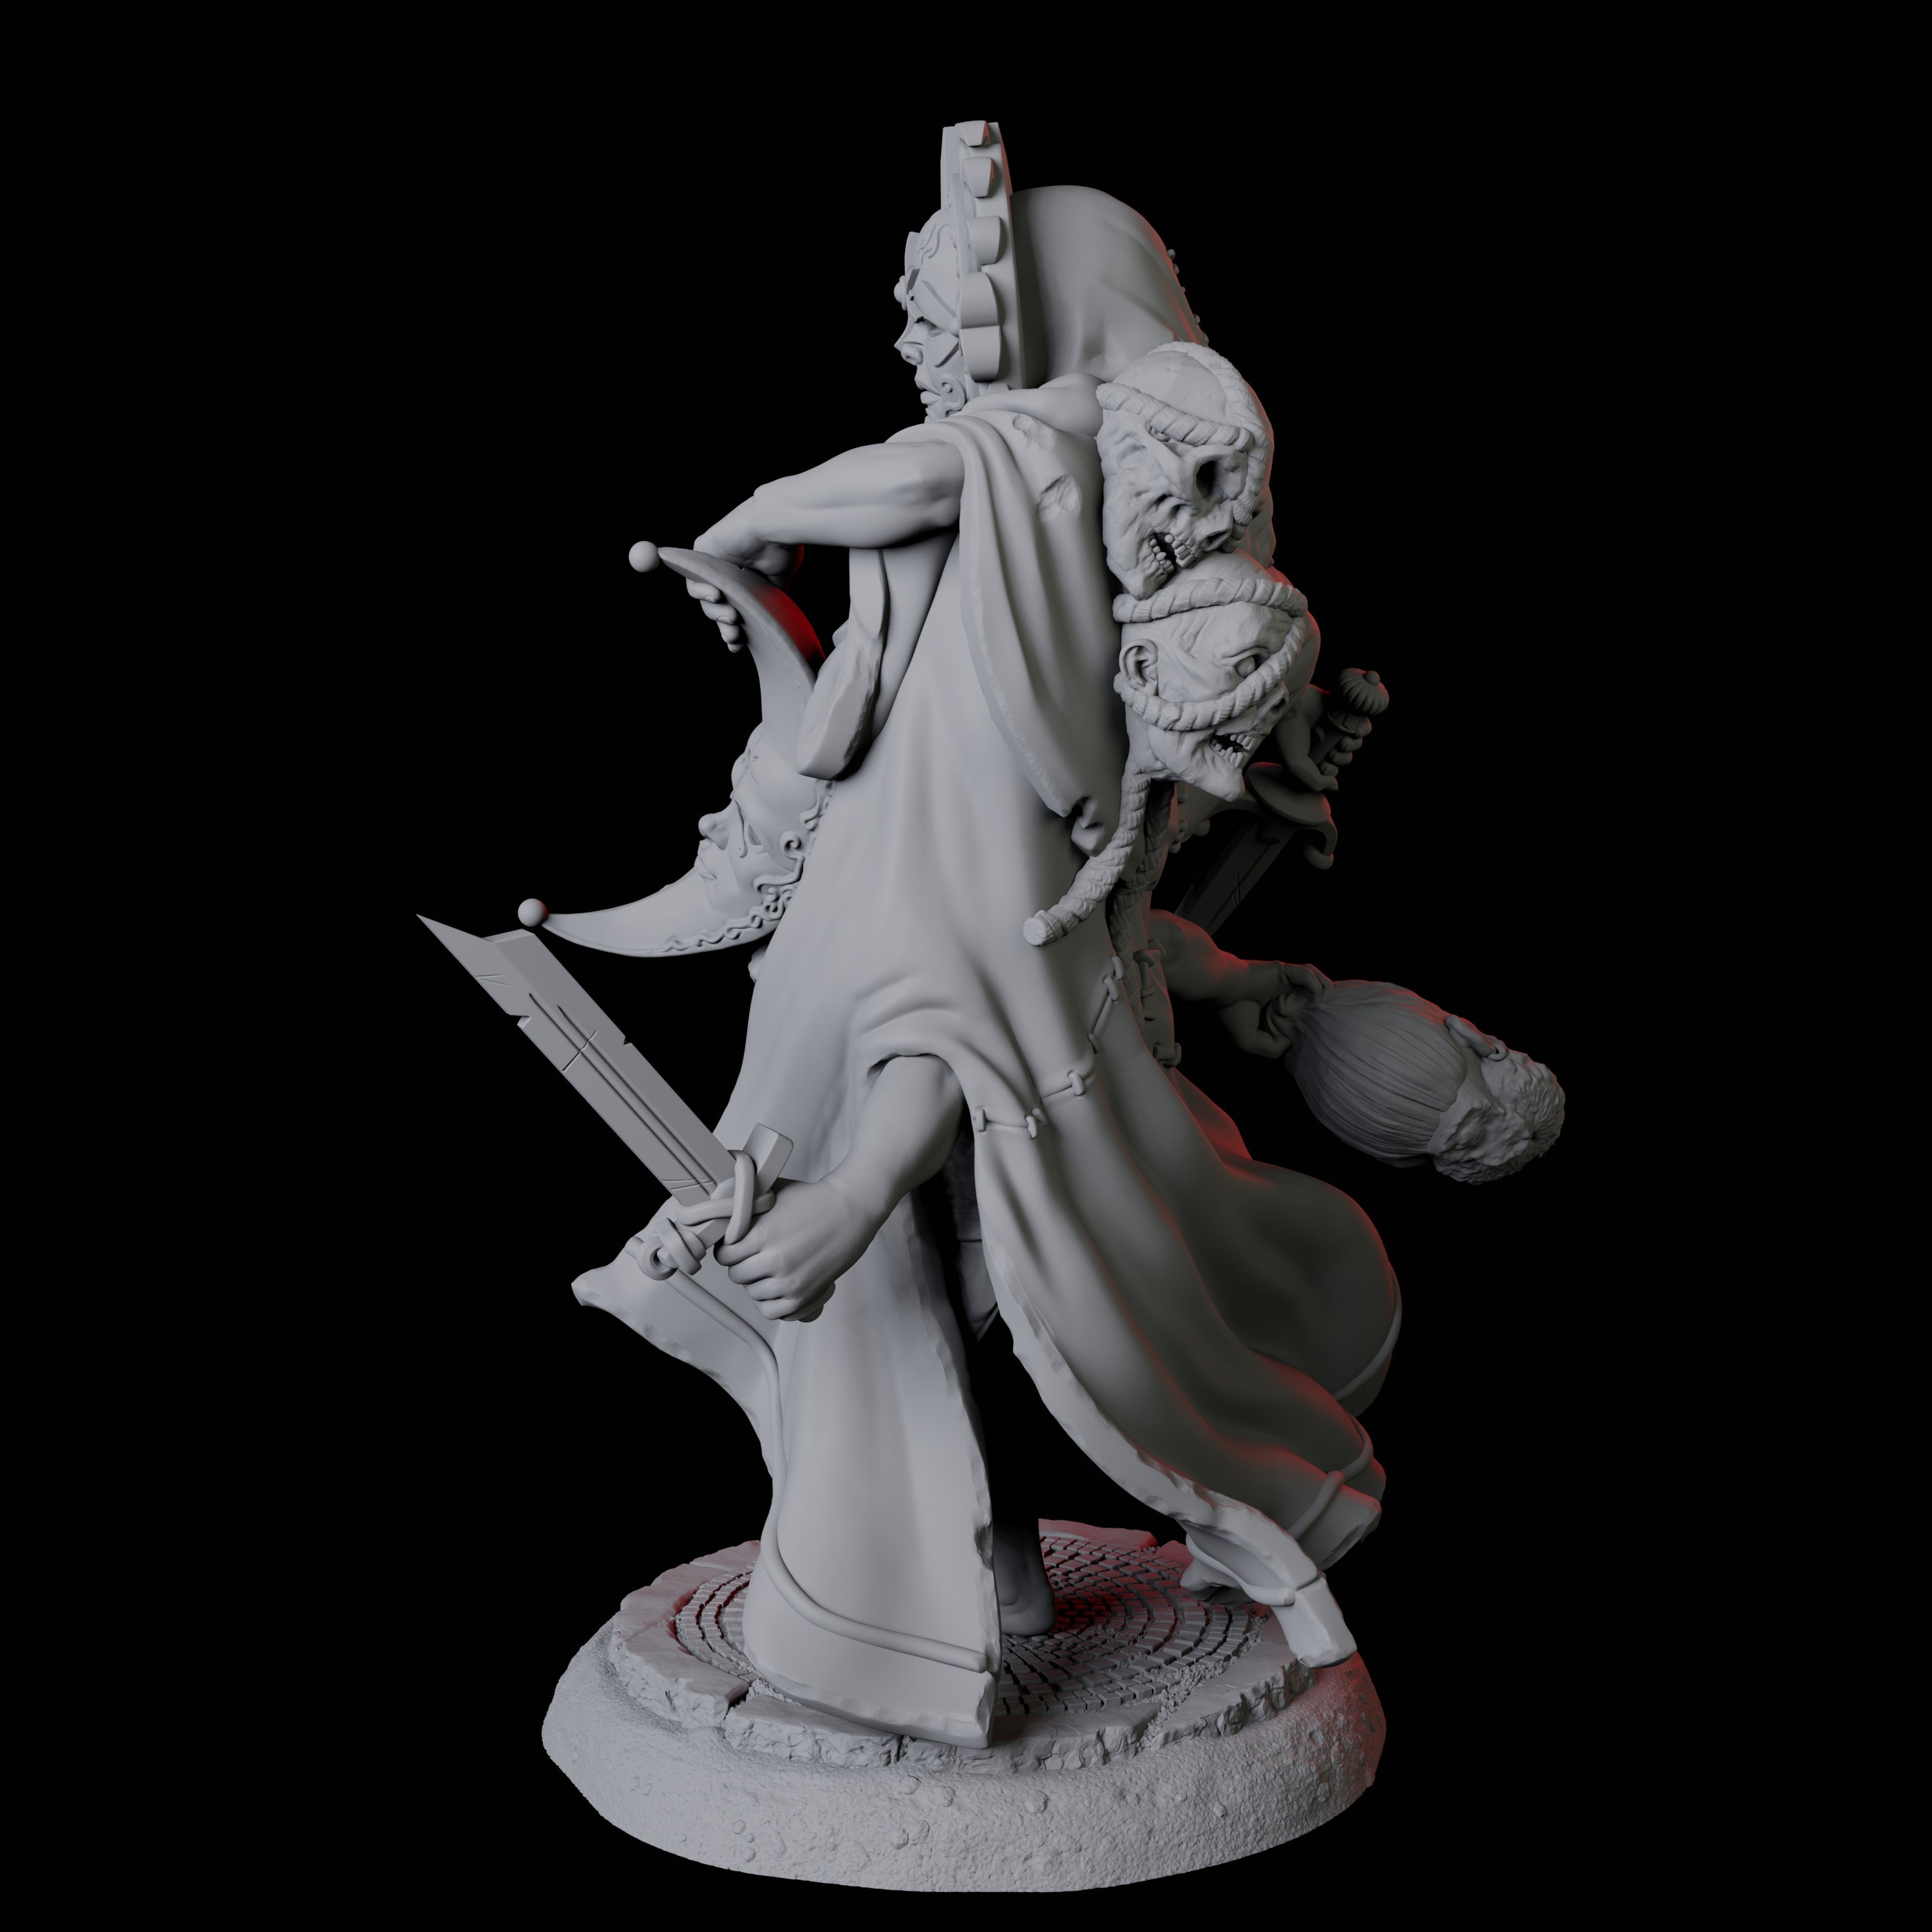 Weird Halfling Jester Pair C Miniature for Dungeons and Dragons, Pathfinder or other TTRPGs